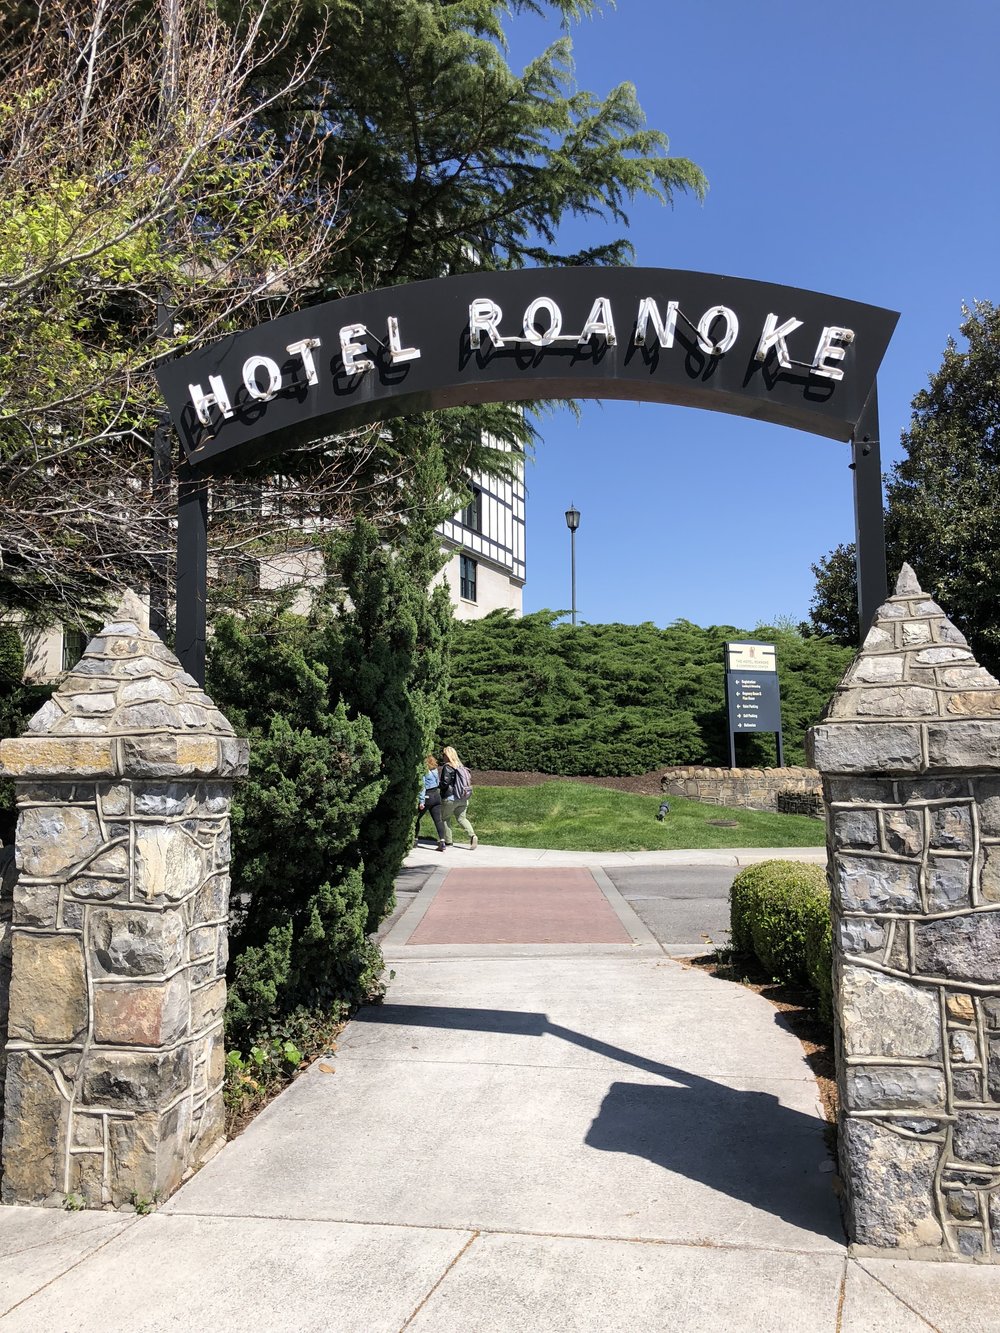  The entrance to Hotel Roanoke 